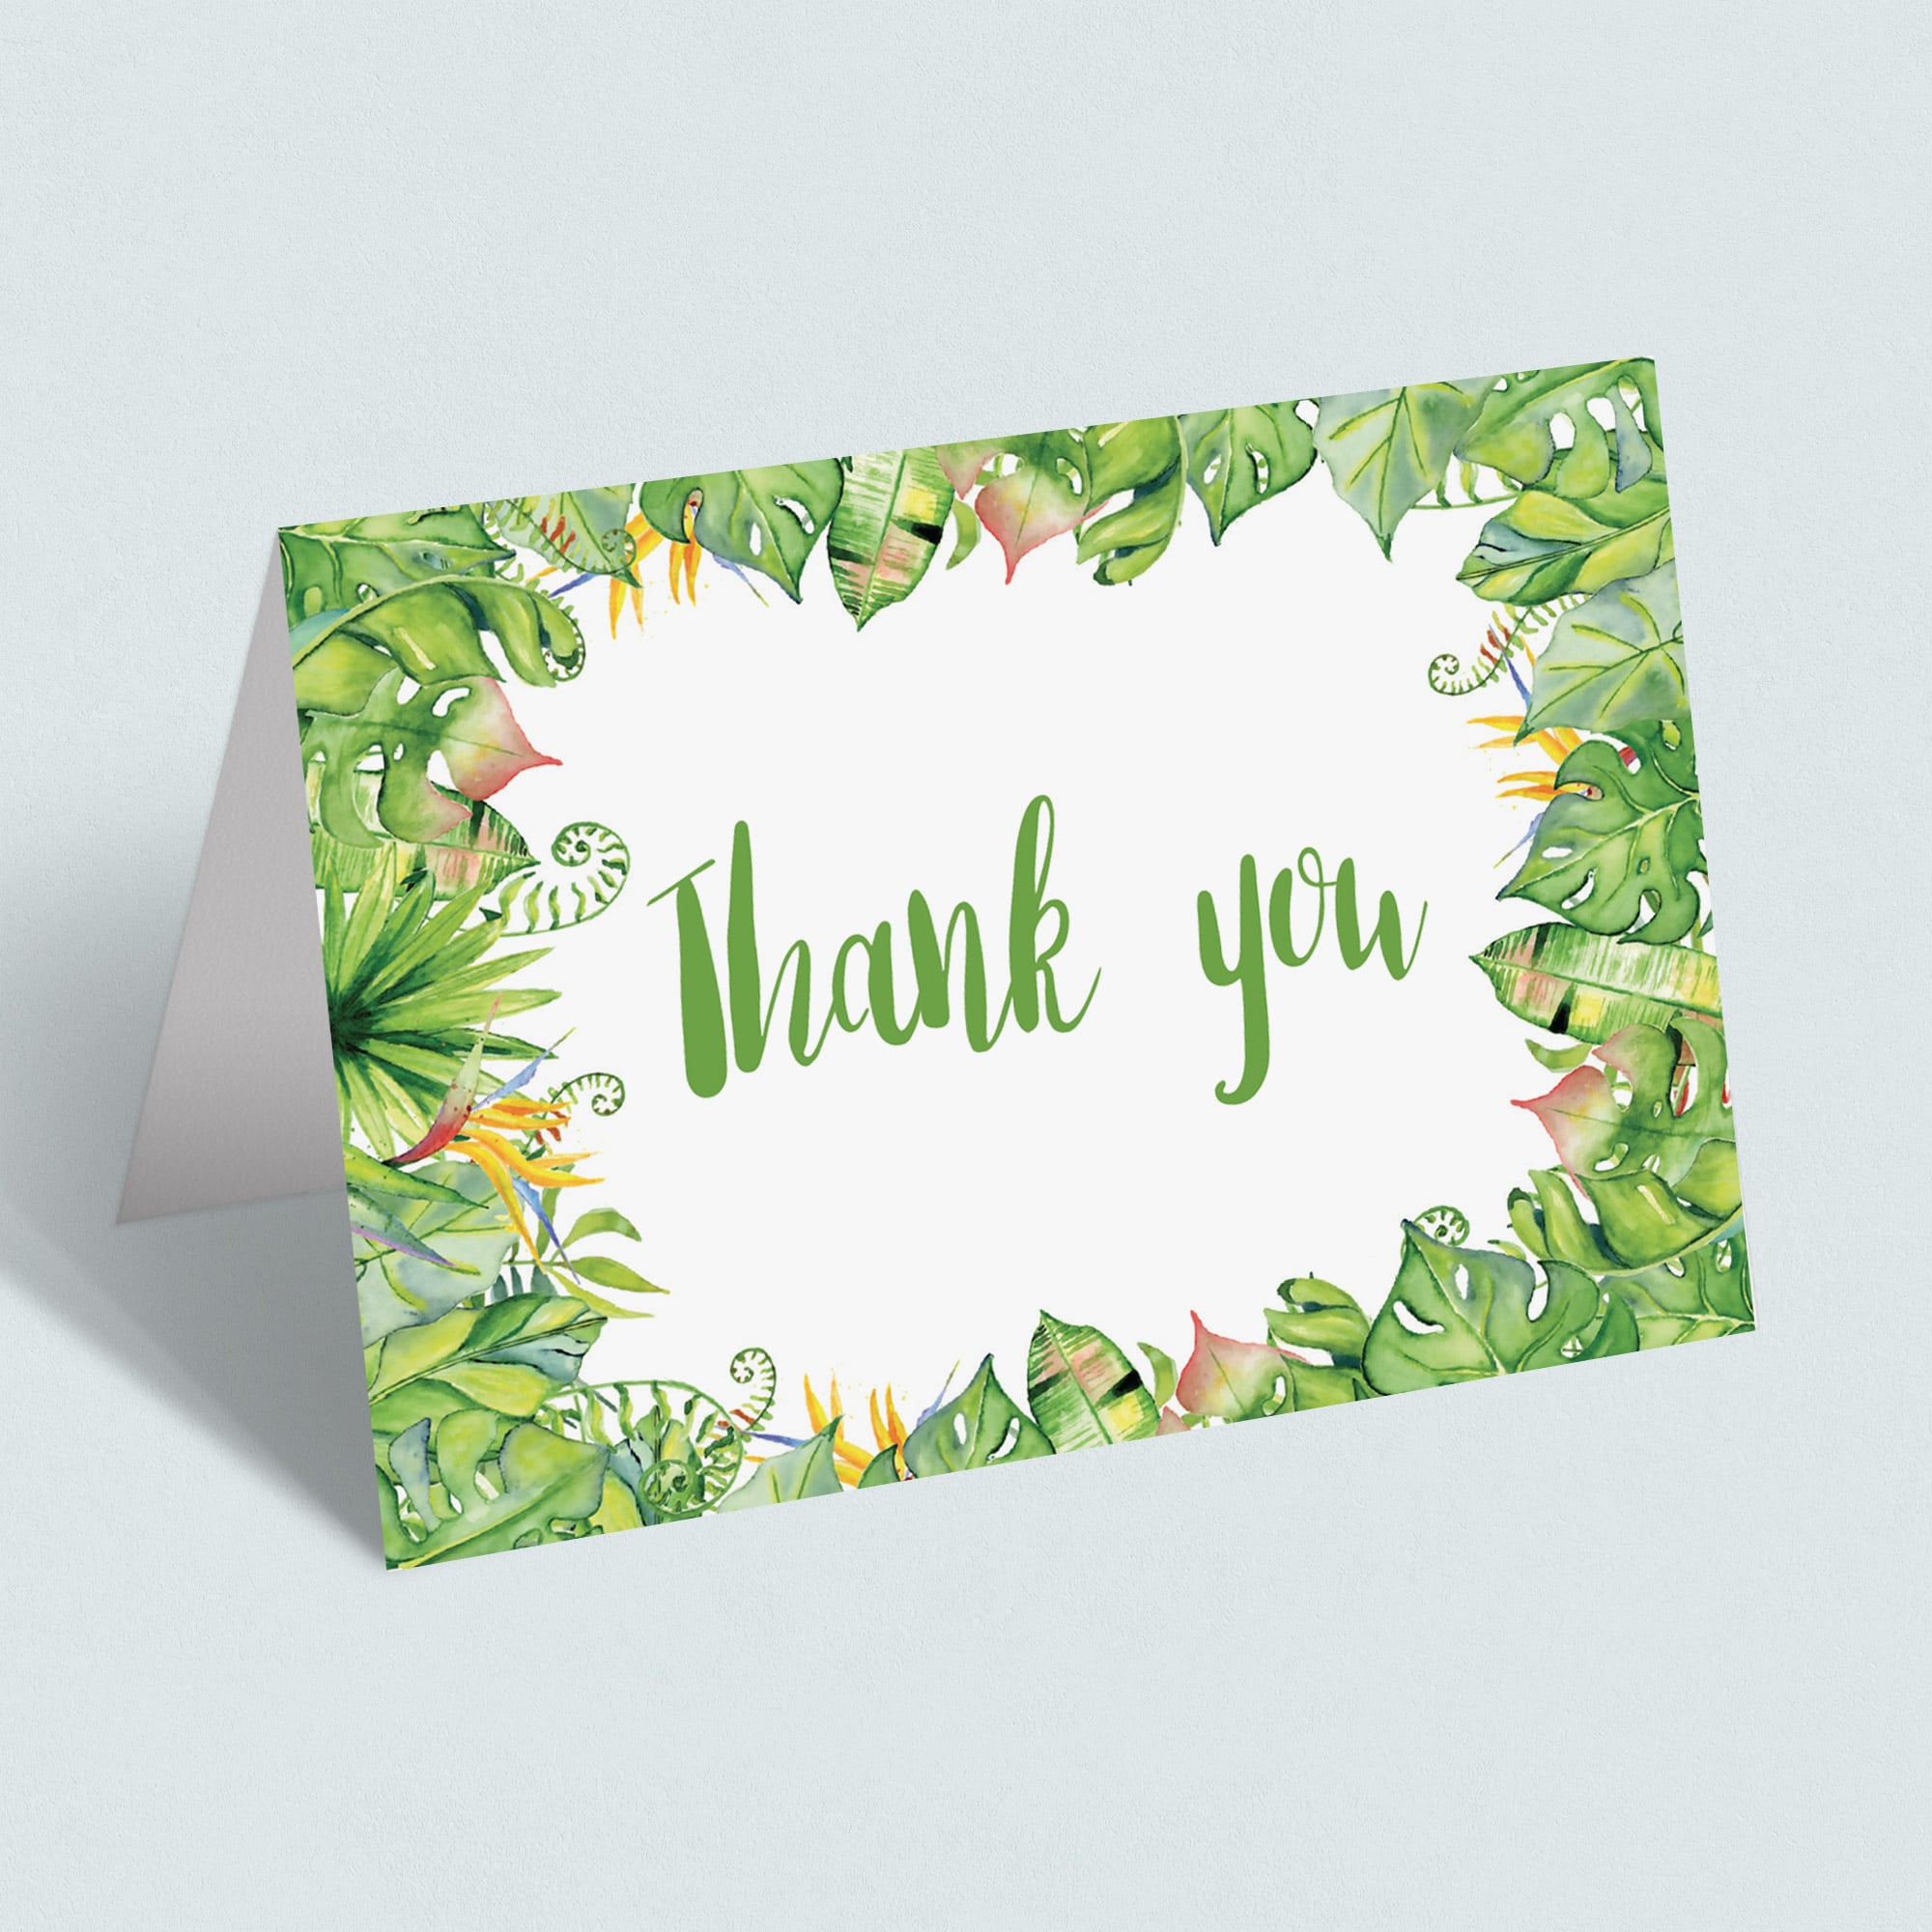 Instant download thank you card for green party by LittleSizzle